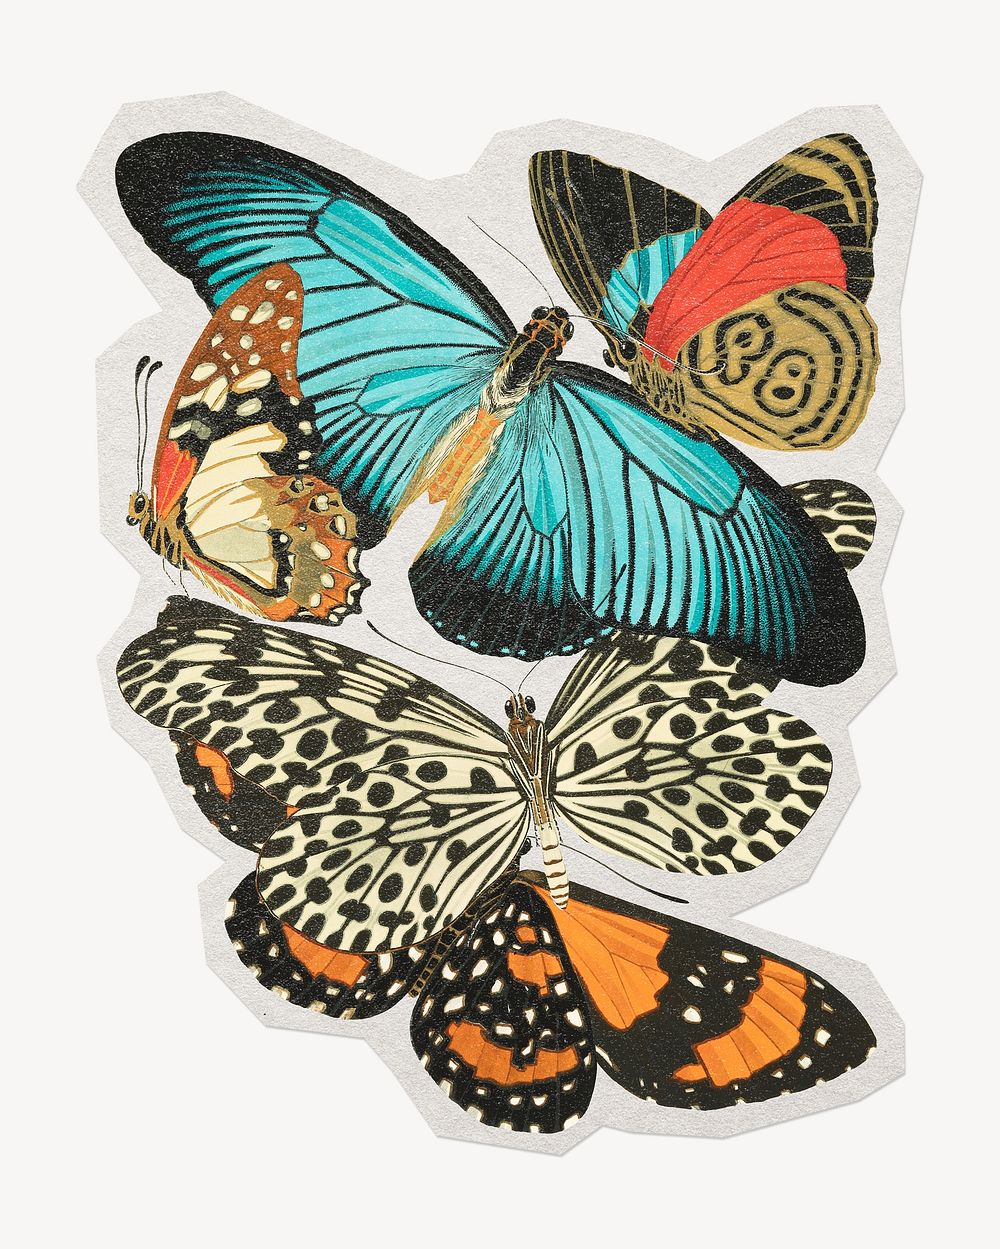 Vintage butterflies, insect, paper cut isolated design.